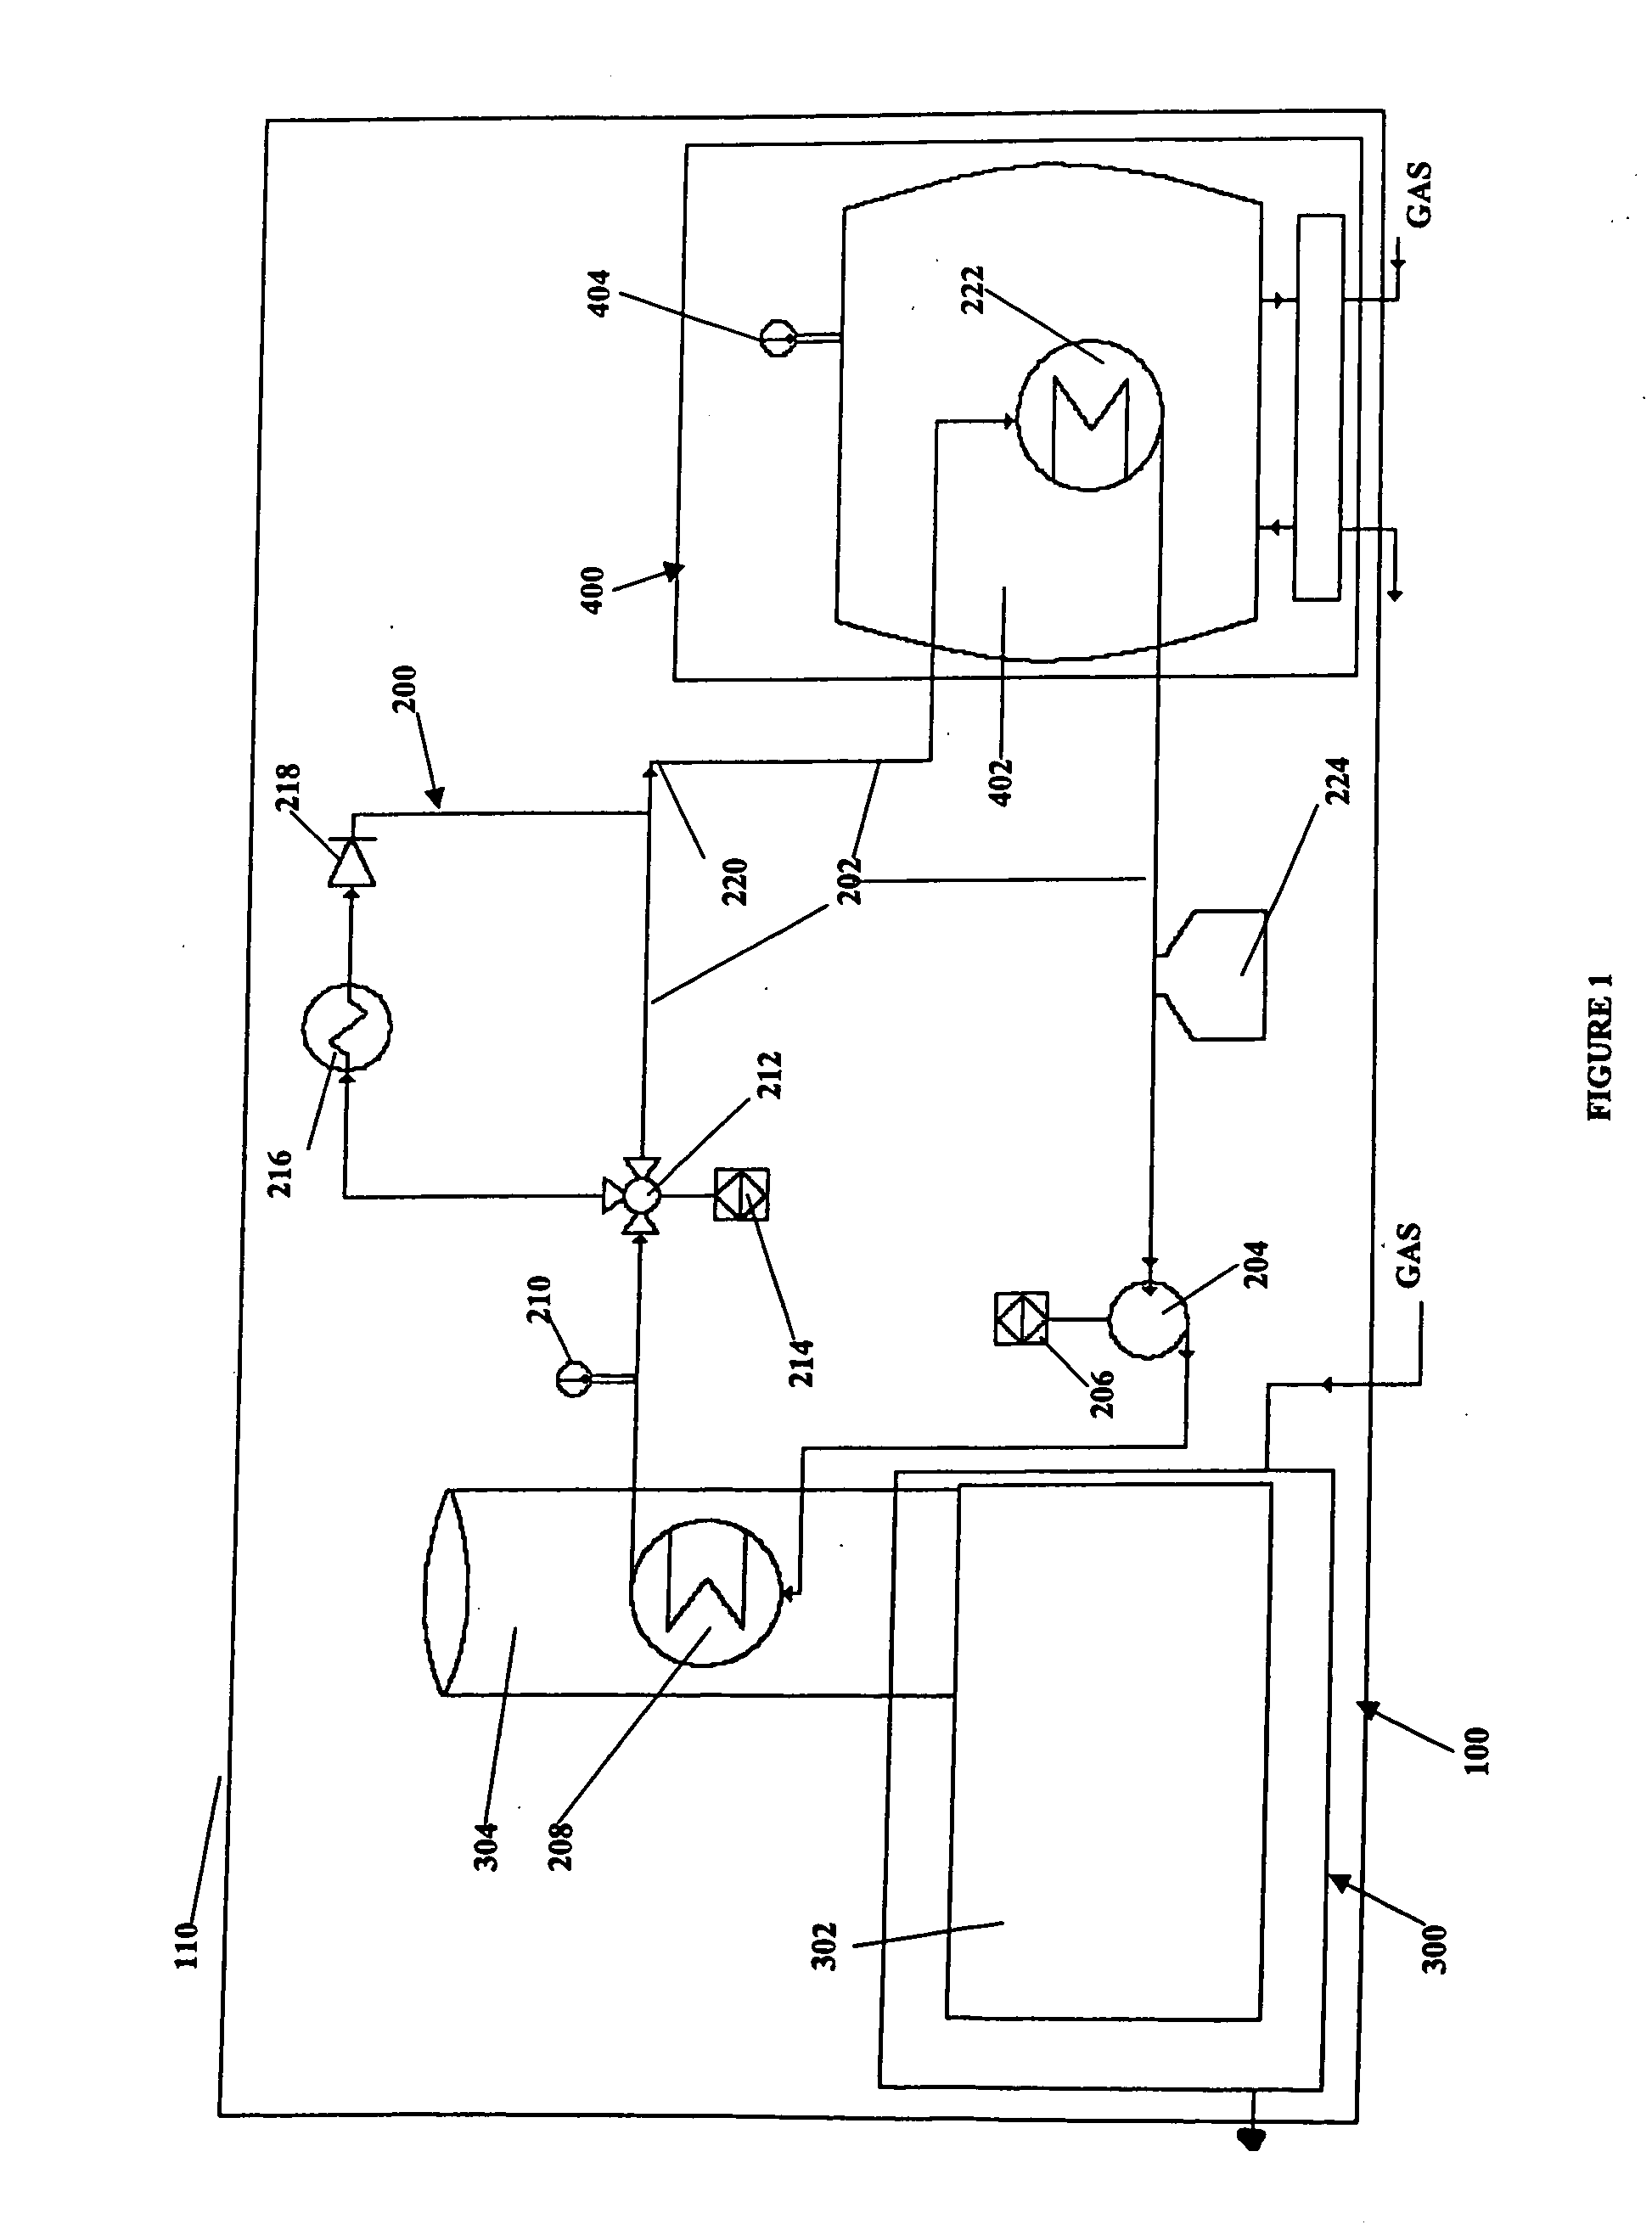 Apparatus for dehydrator and compressor combination skid and method of operation